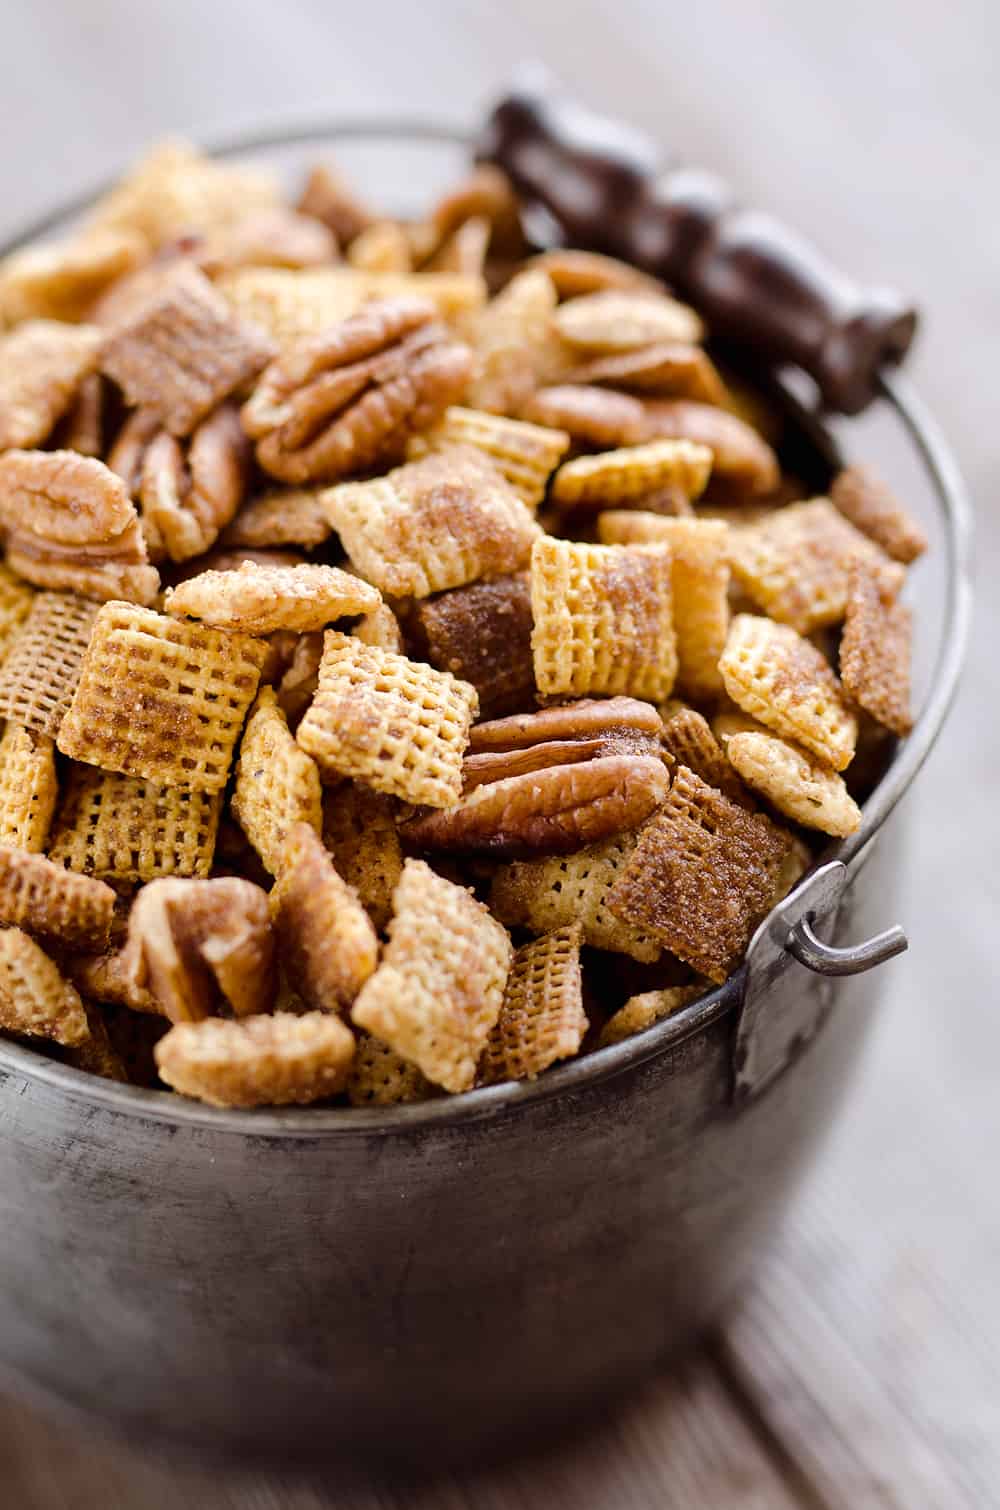 Sweet & Spicy Pecan Snack Mix is a delicious treat with Chex coated in a spicy cinnamon brown sugar mixture and tossed with pecans. This delicious Chex Mix will disappear quickly at your next holiday gathering! 